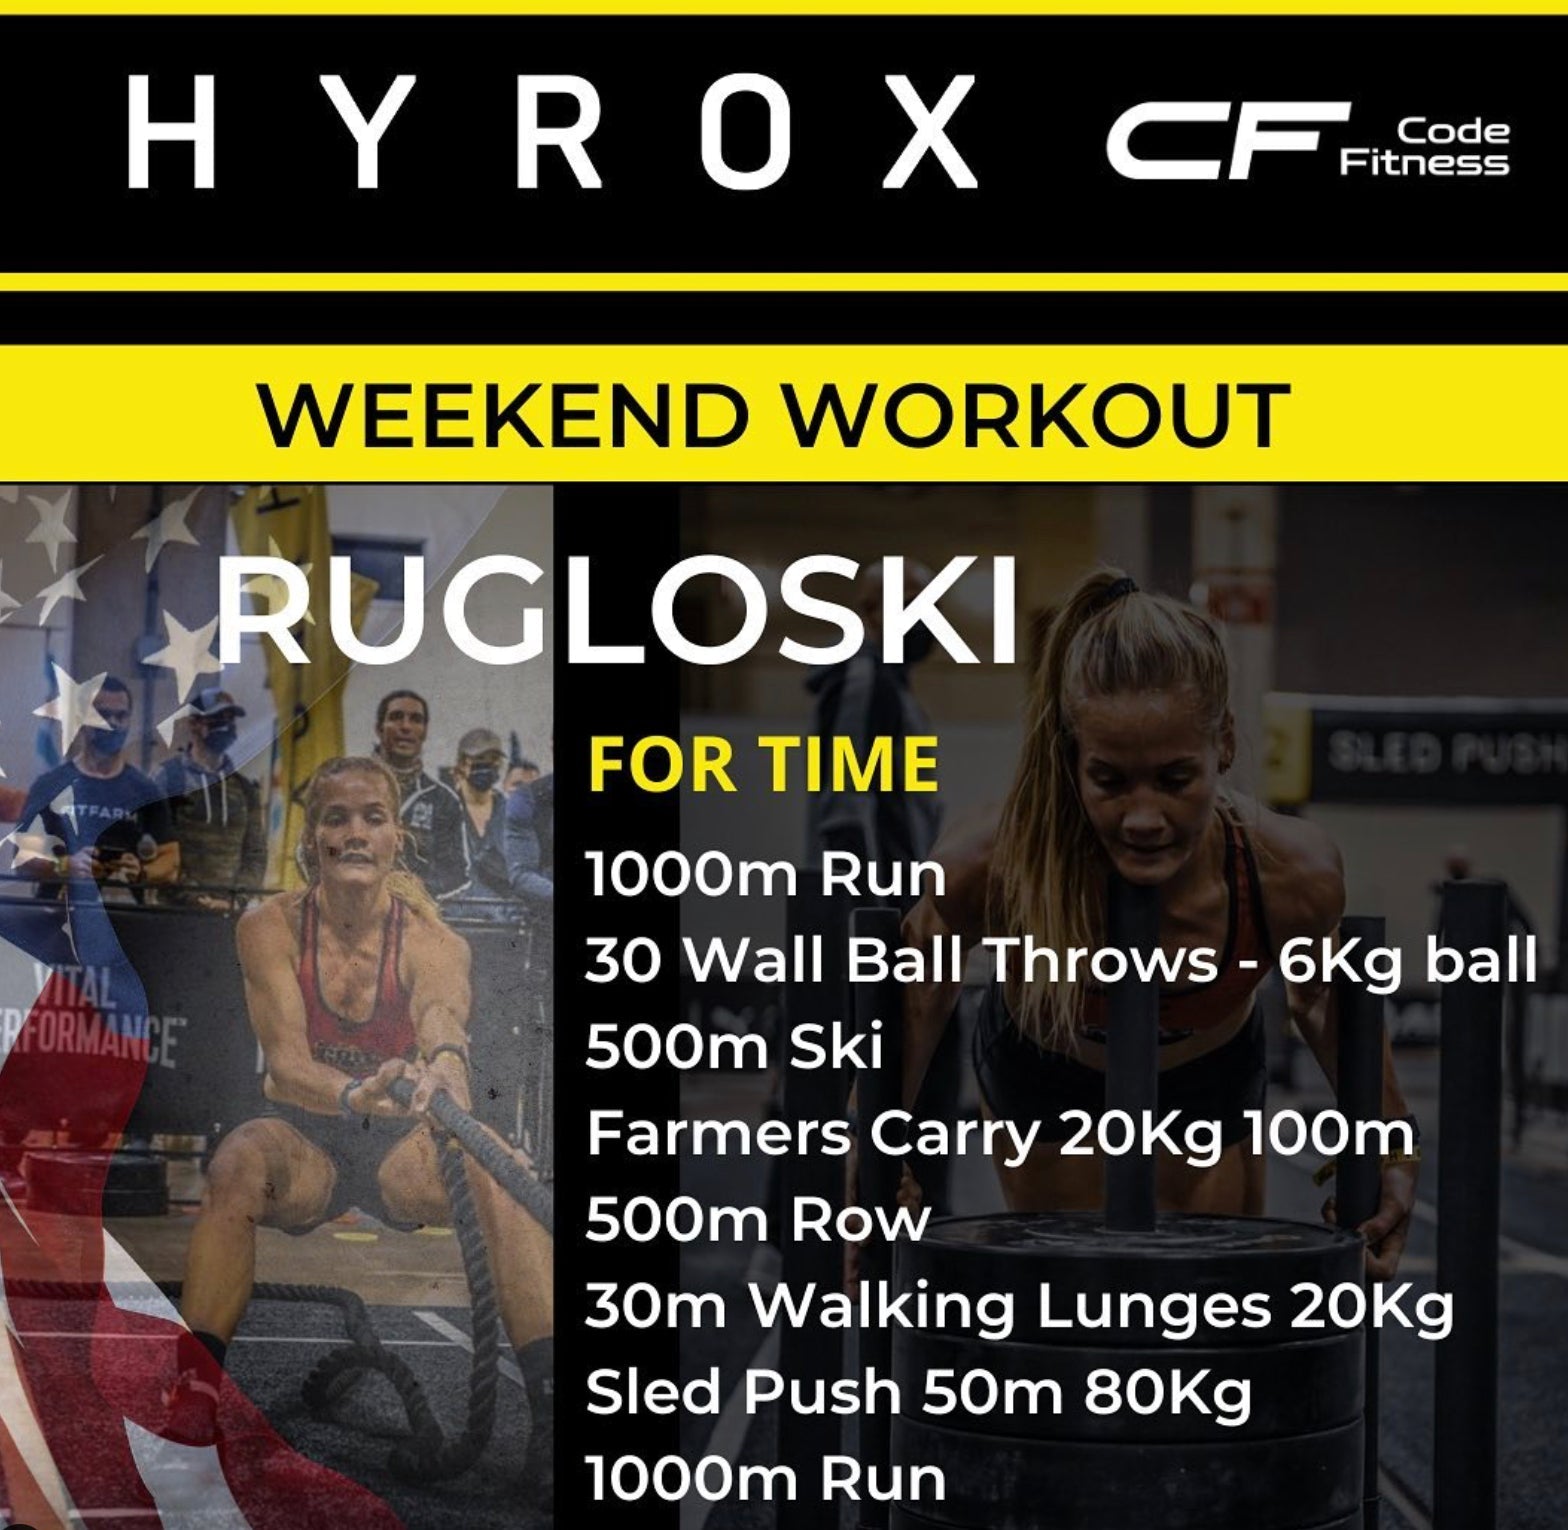 What is Hyrox? New, International Fitness Event Hits U.S. - Hyperwear